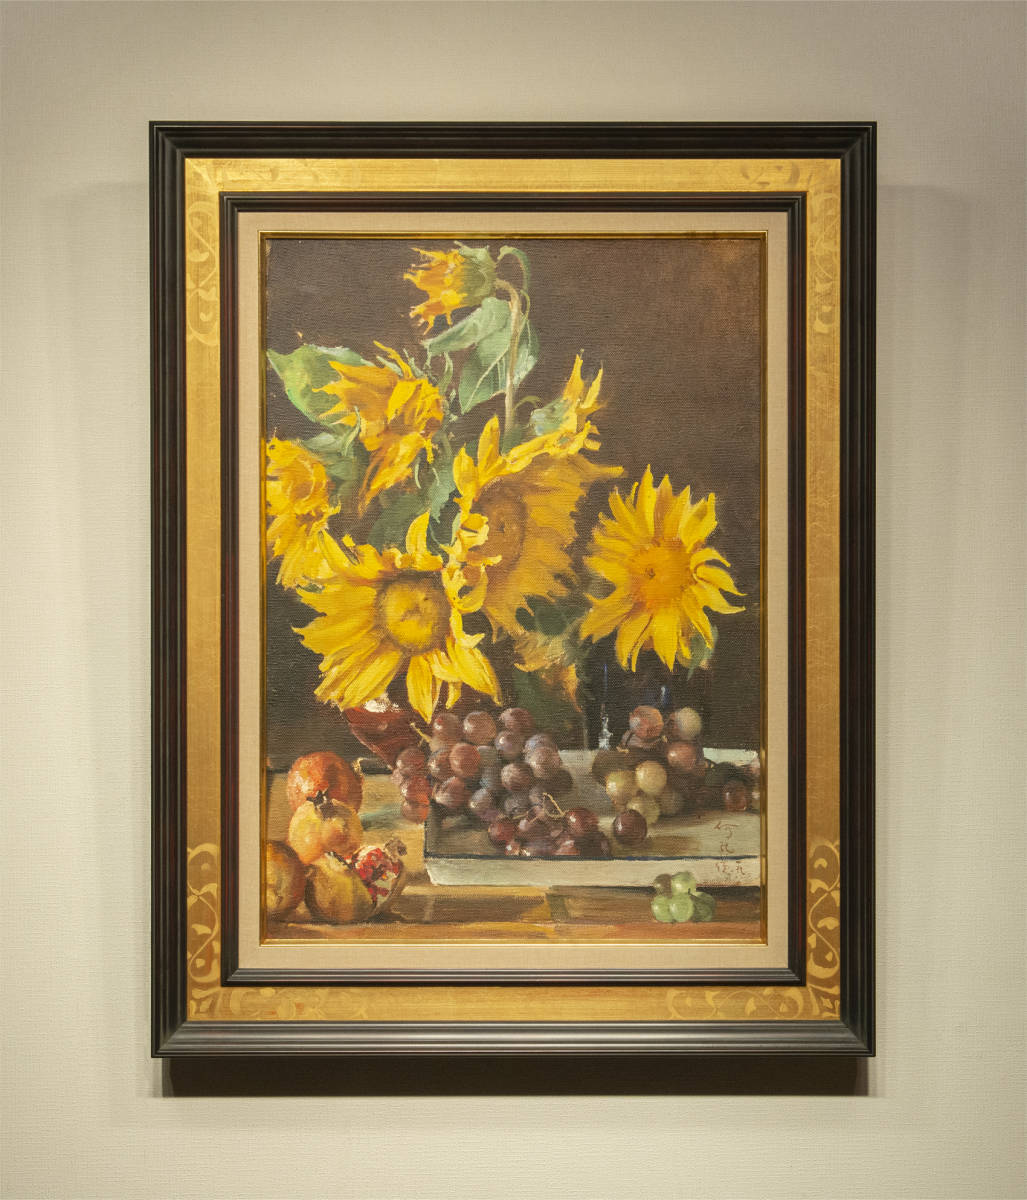 Sunflowers by He Kongde, 1989, Grapes and Pomegranate Oil Painting Framed Guaranteed Authentic Chinese Painting Contemporary Art, Painting, Oil painting, Still life